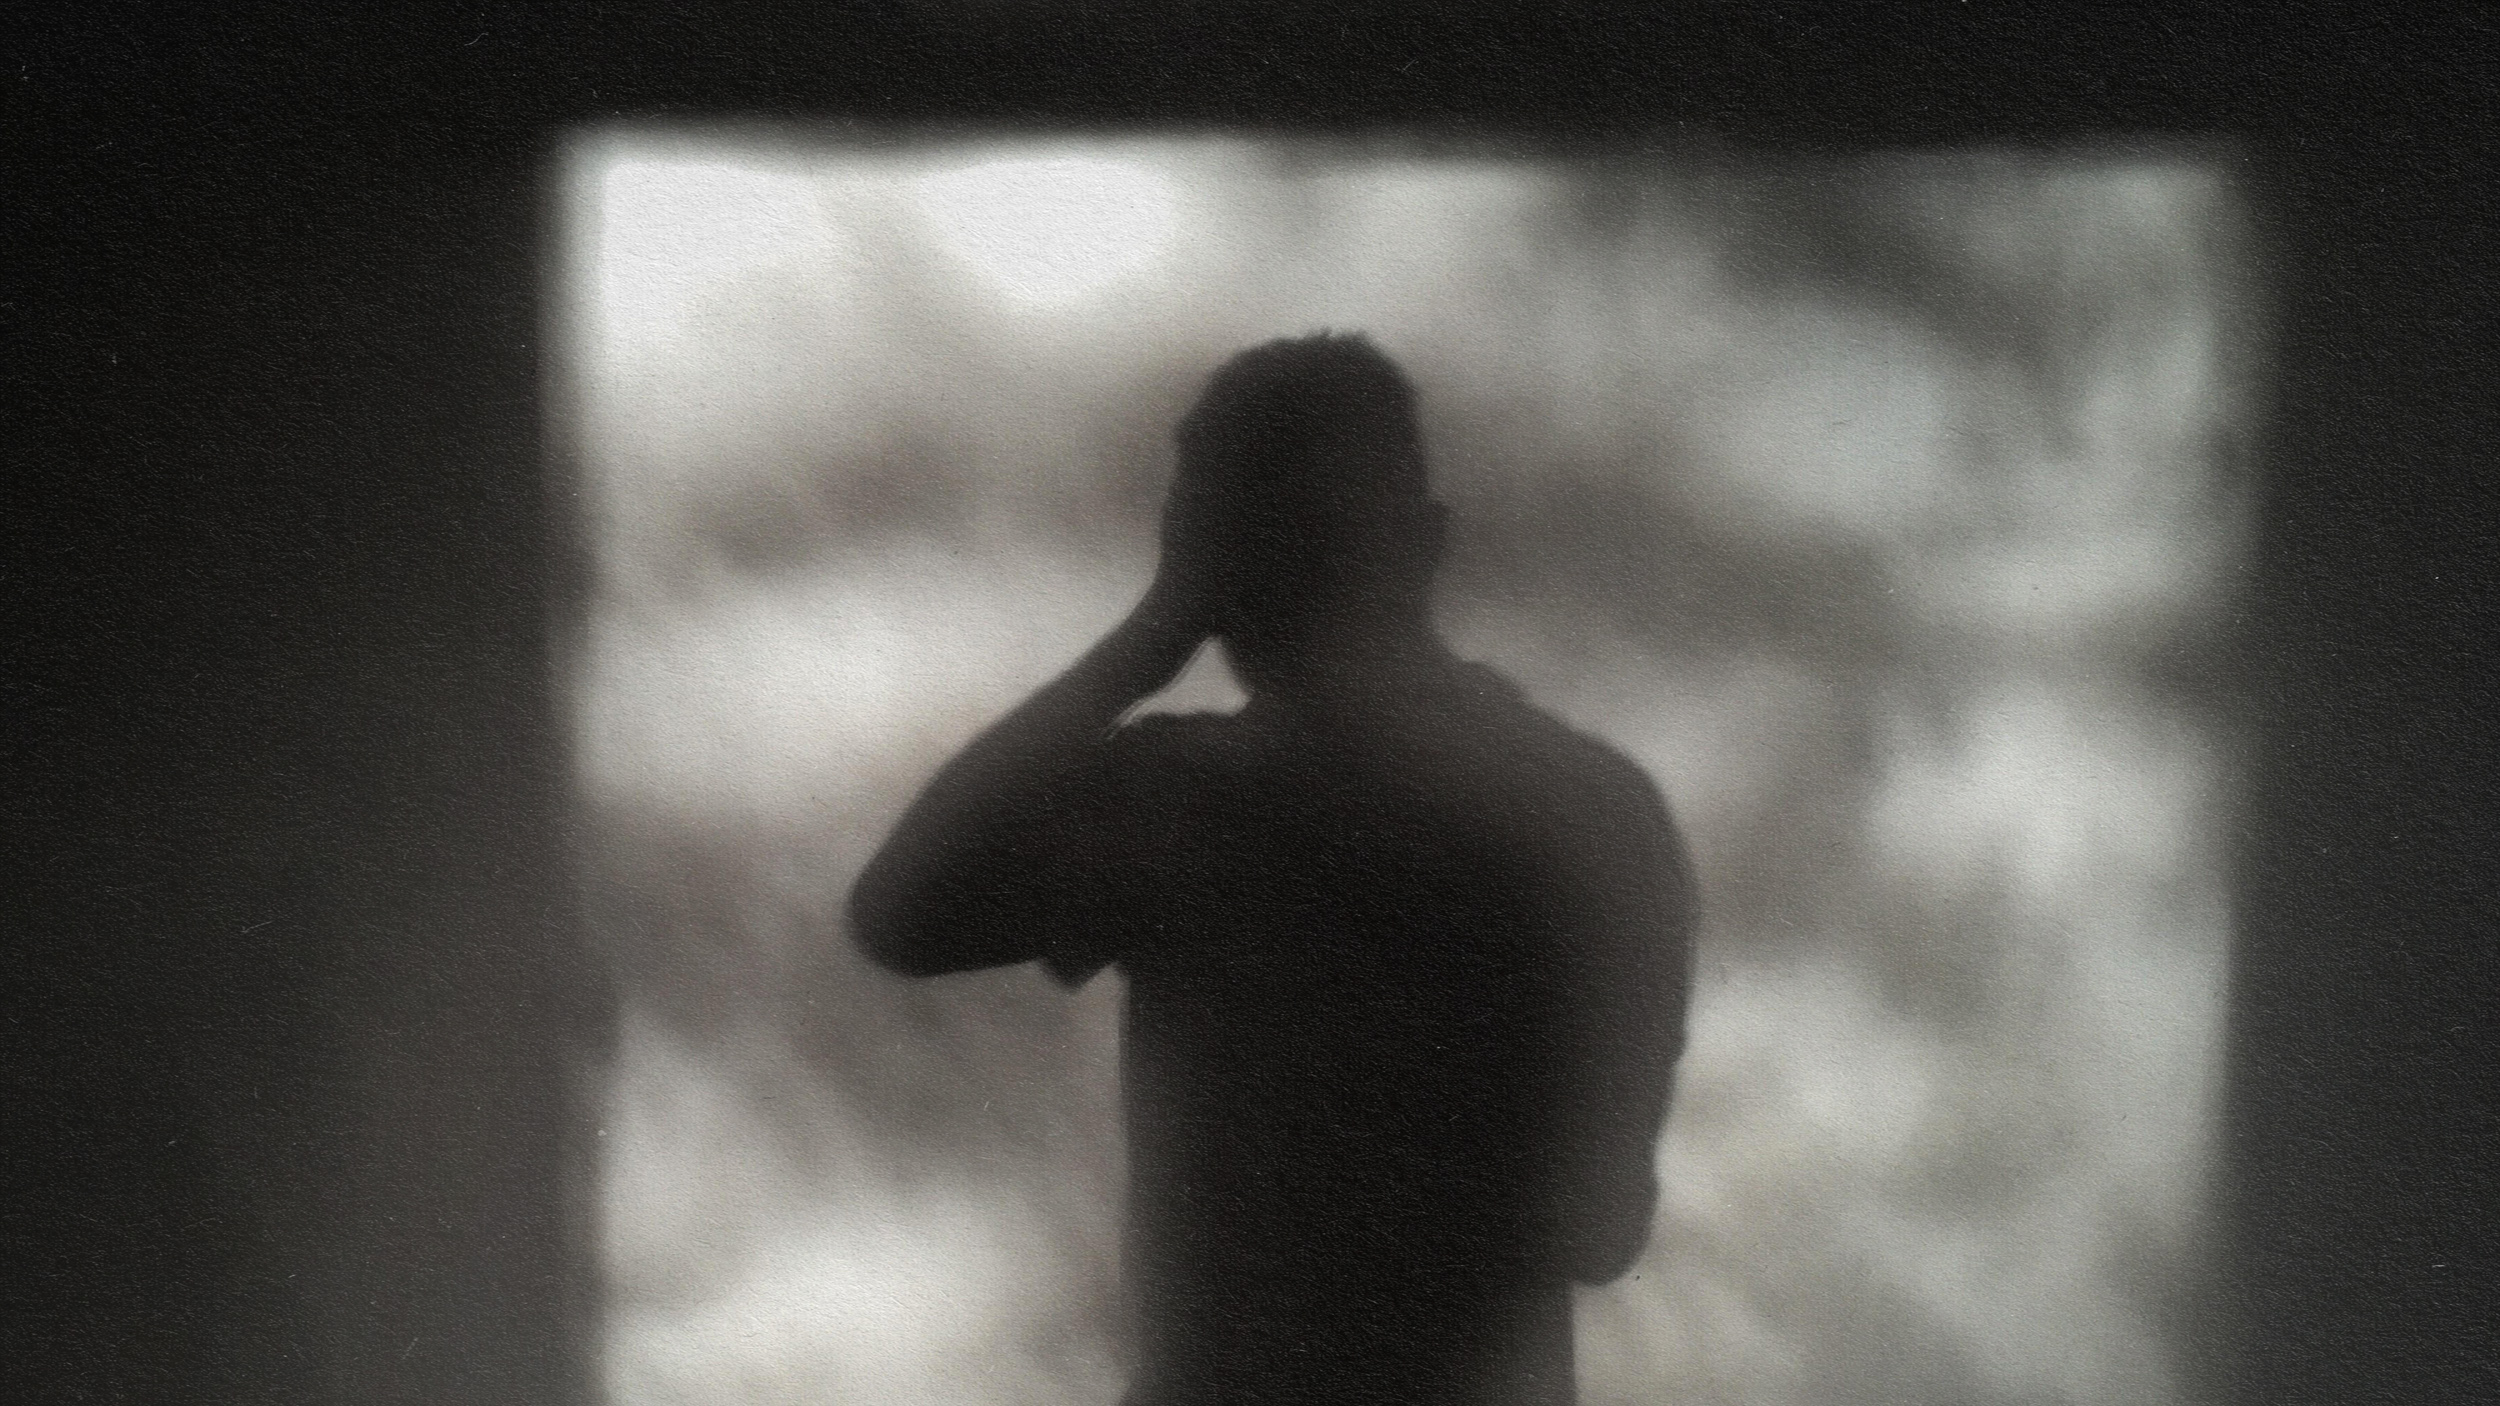 A man's silhouette captured in front of a window.